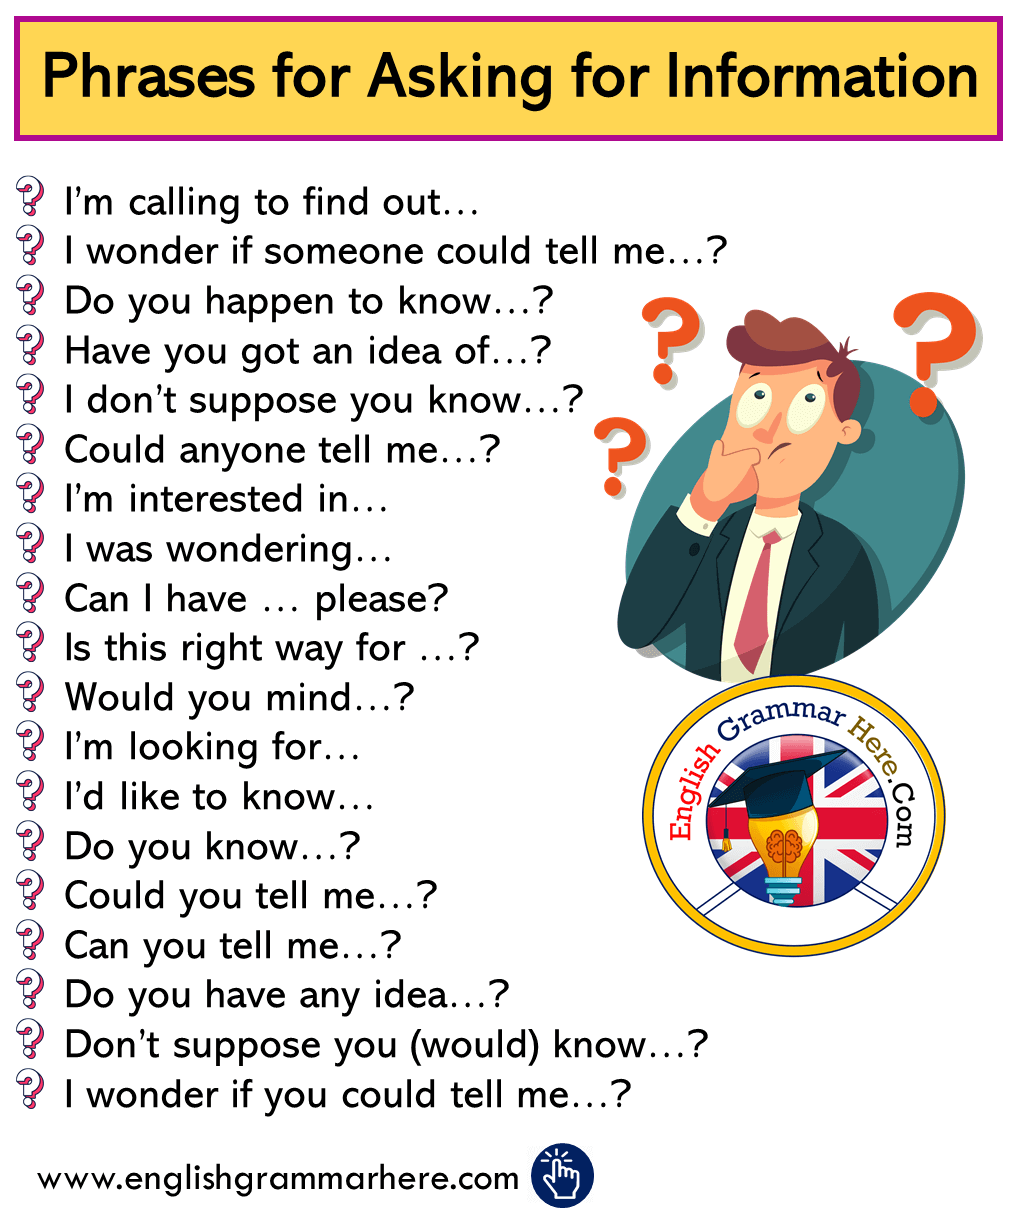 Phrases for Asking for Information